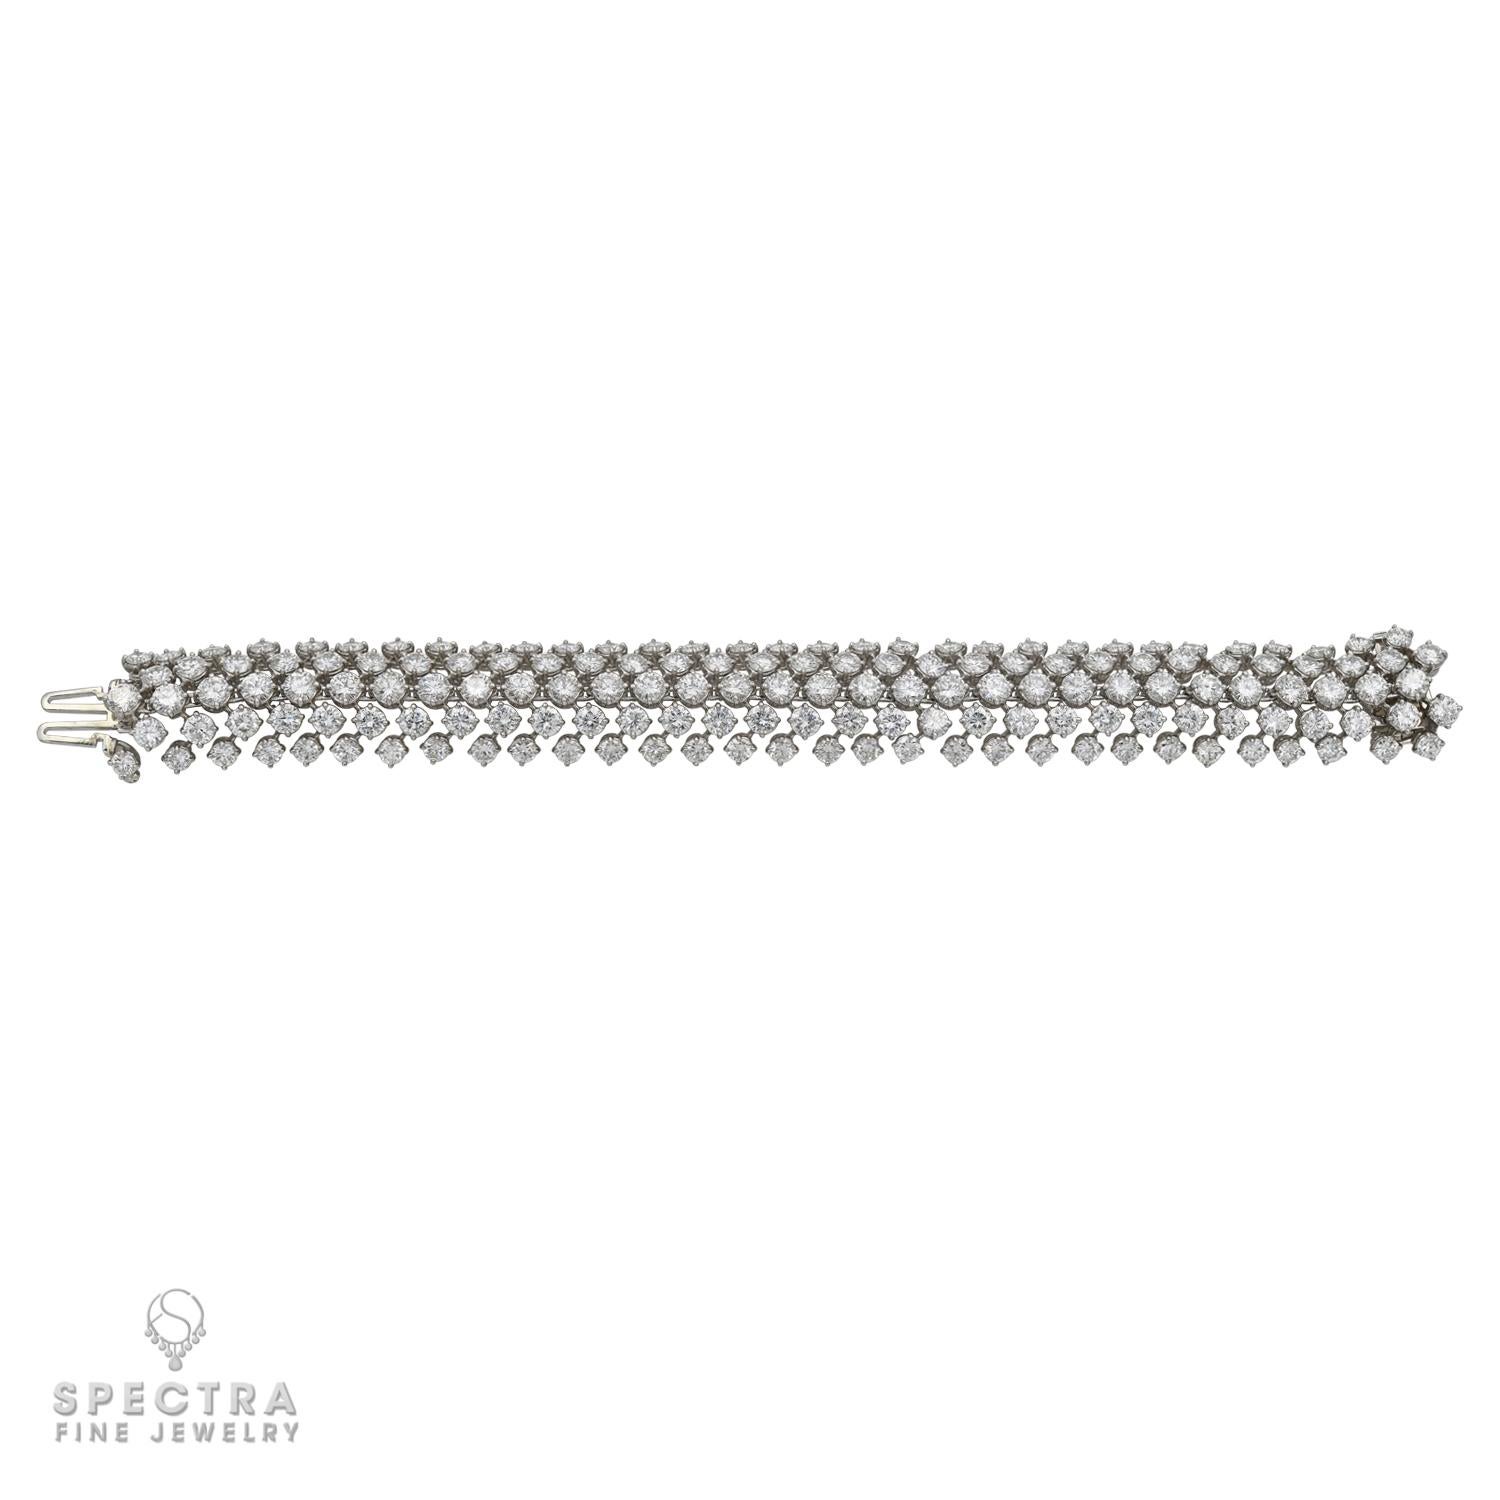 Some jewelers have a fluid way with diamonds. Some produce feats of engineering, with innovative constructions that offer flexibility and a little bit of magic. The maker of this Vintage Diamond 5-Row Articulated Bombé Bracelet, made in the 20th